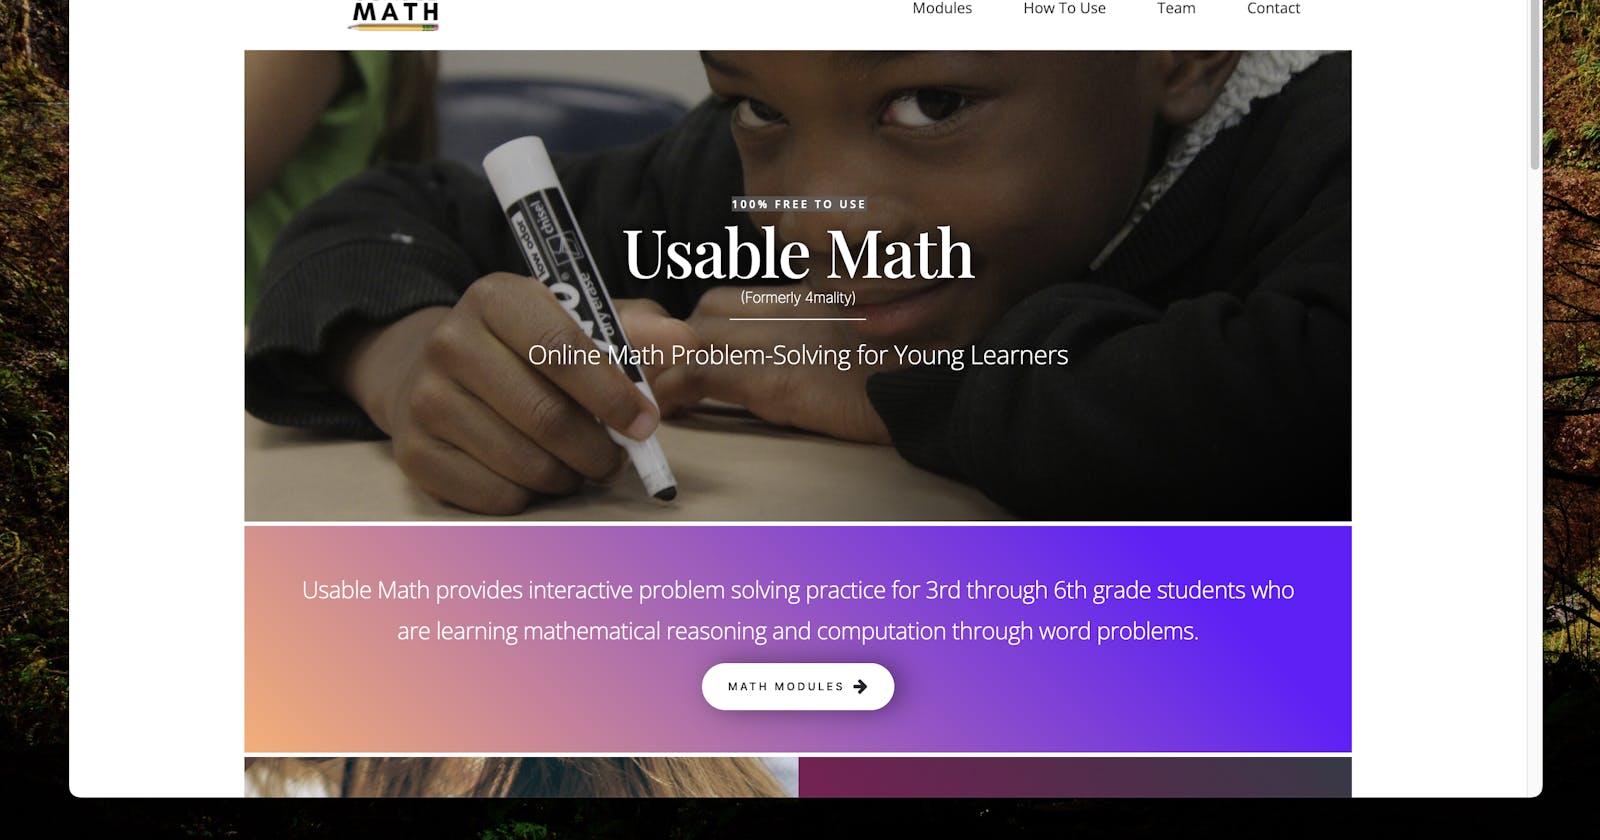 Usable Math: Collaboration in Math Problem Solving